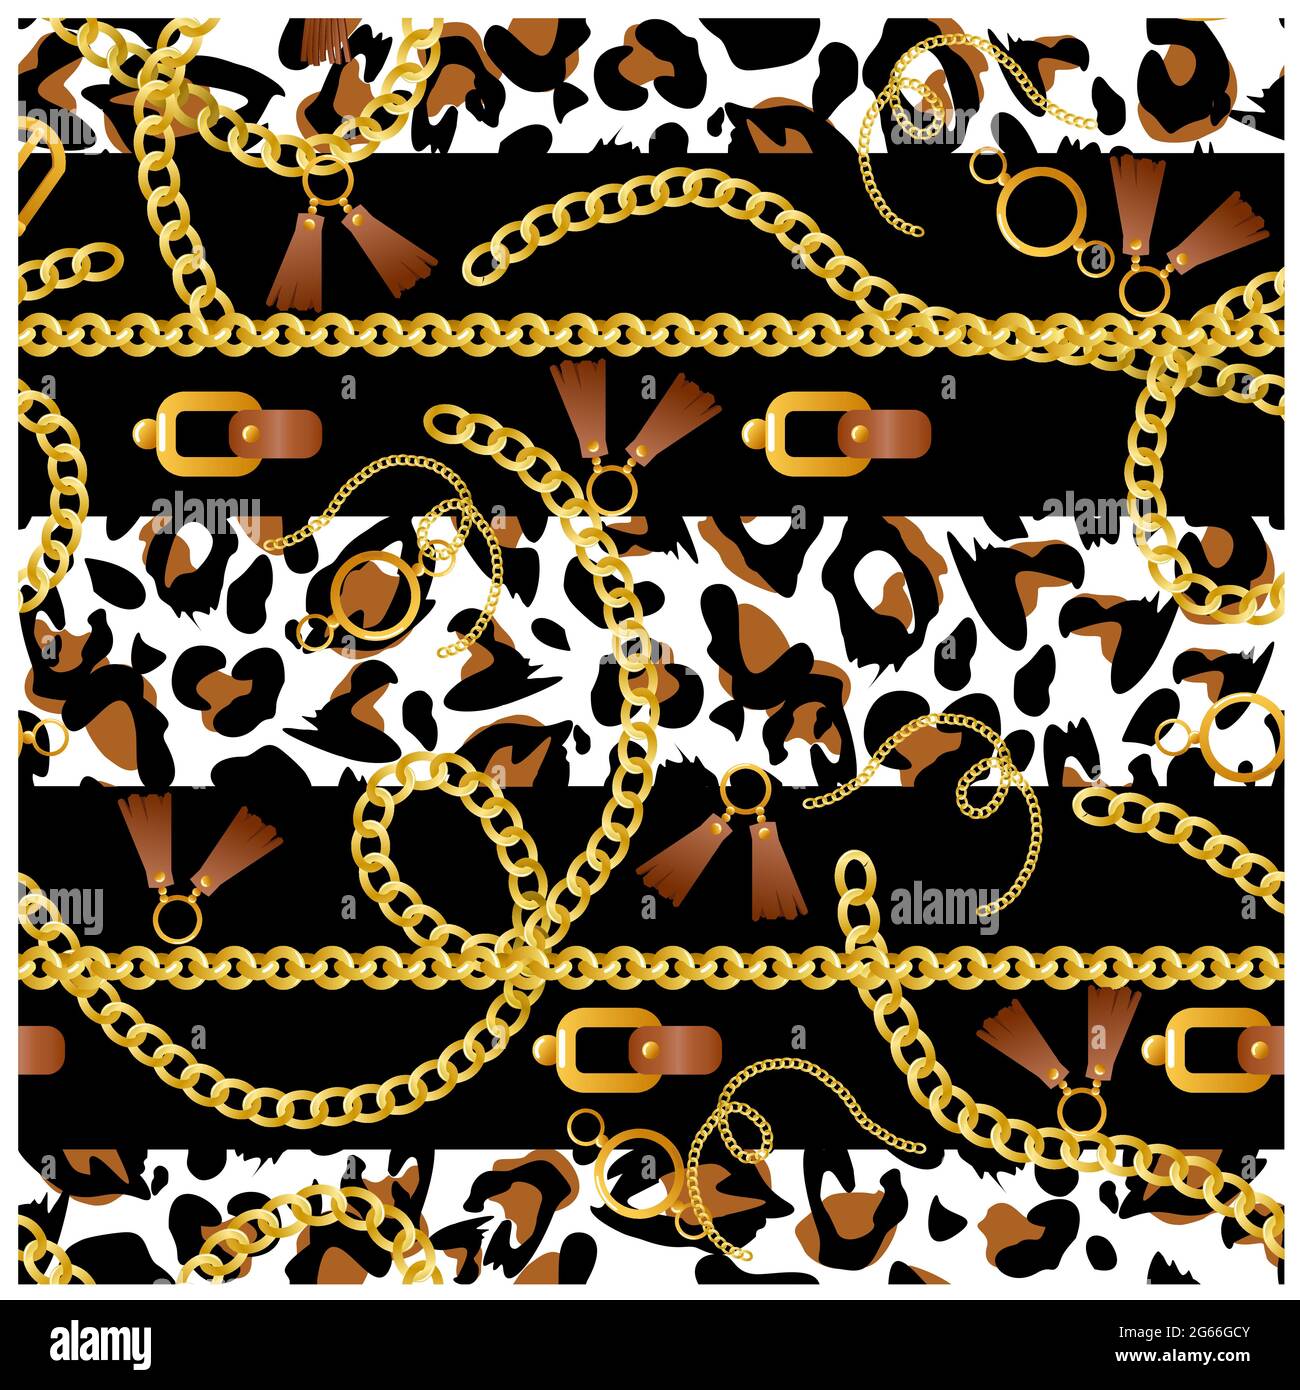 Vector illustration of seamless pattern with belts, chains, anchor, coins on leopard background for fabric design. Stock Vector